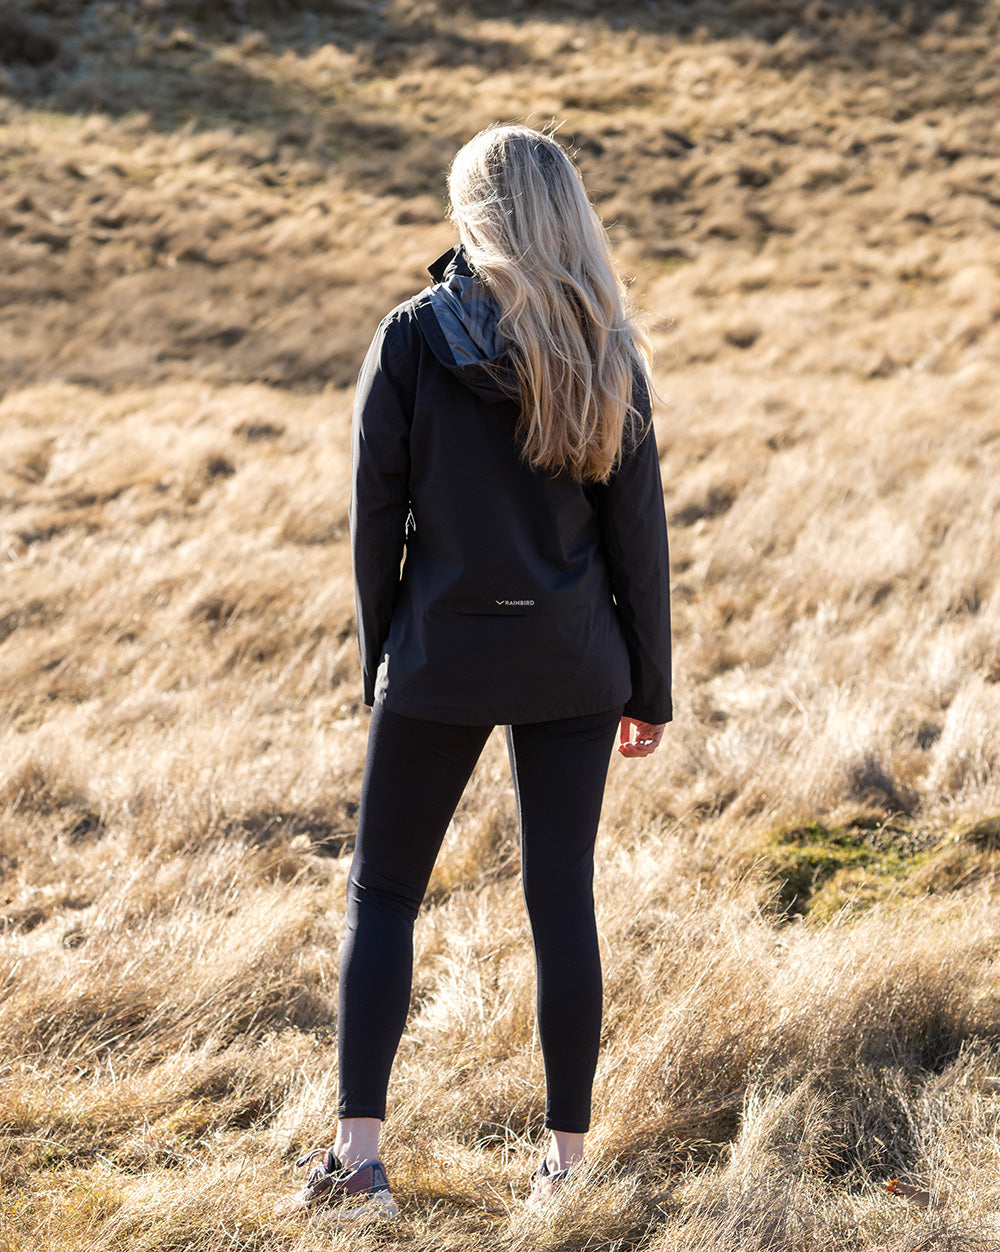 Halley Shell Jacket in Black